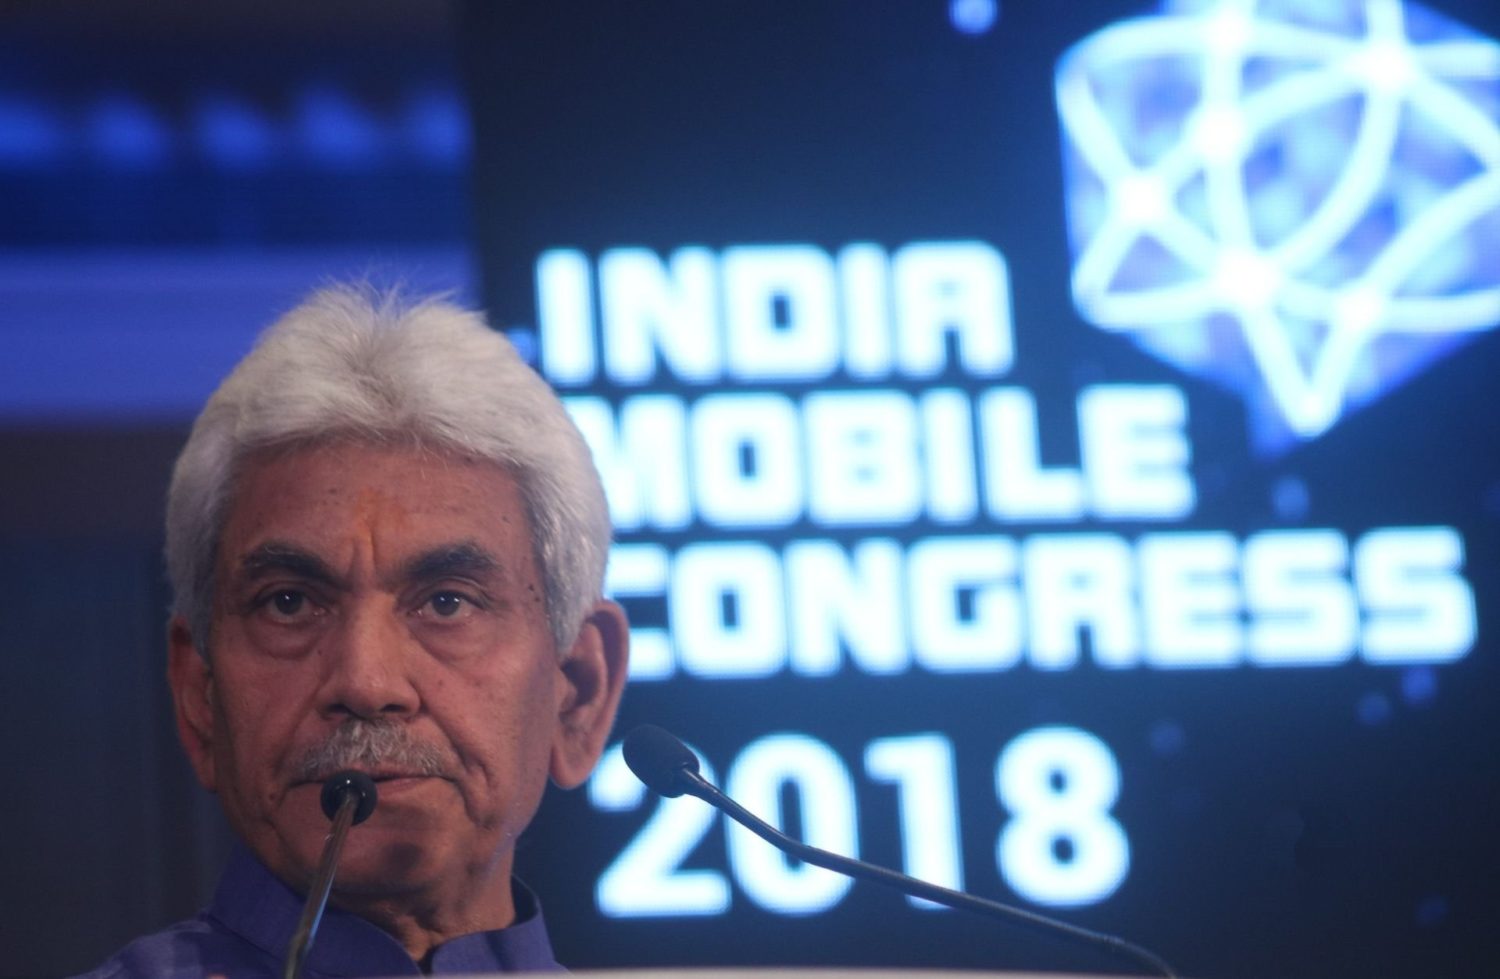 Apprize India Mobile Congress 2018